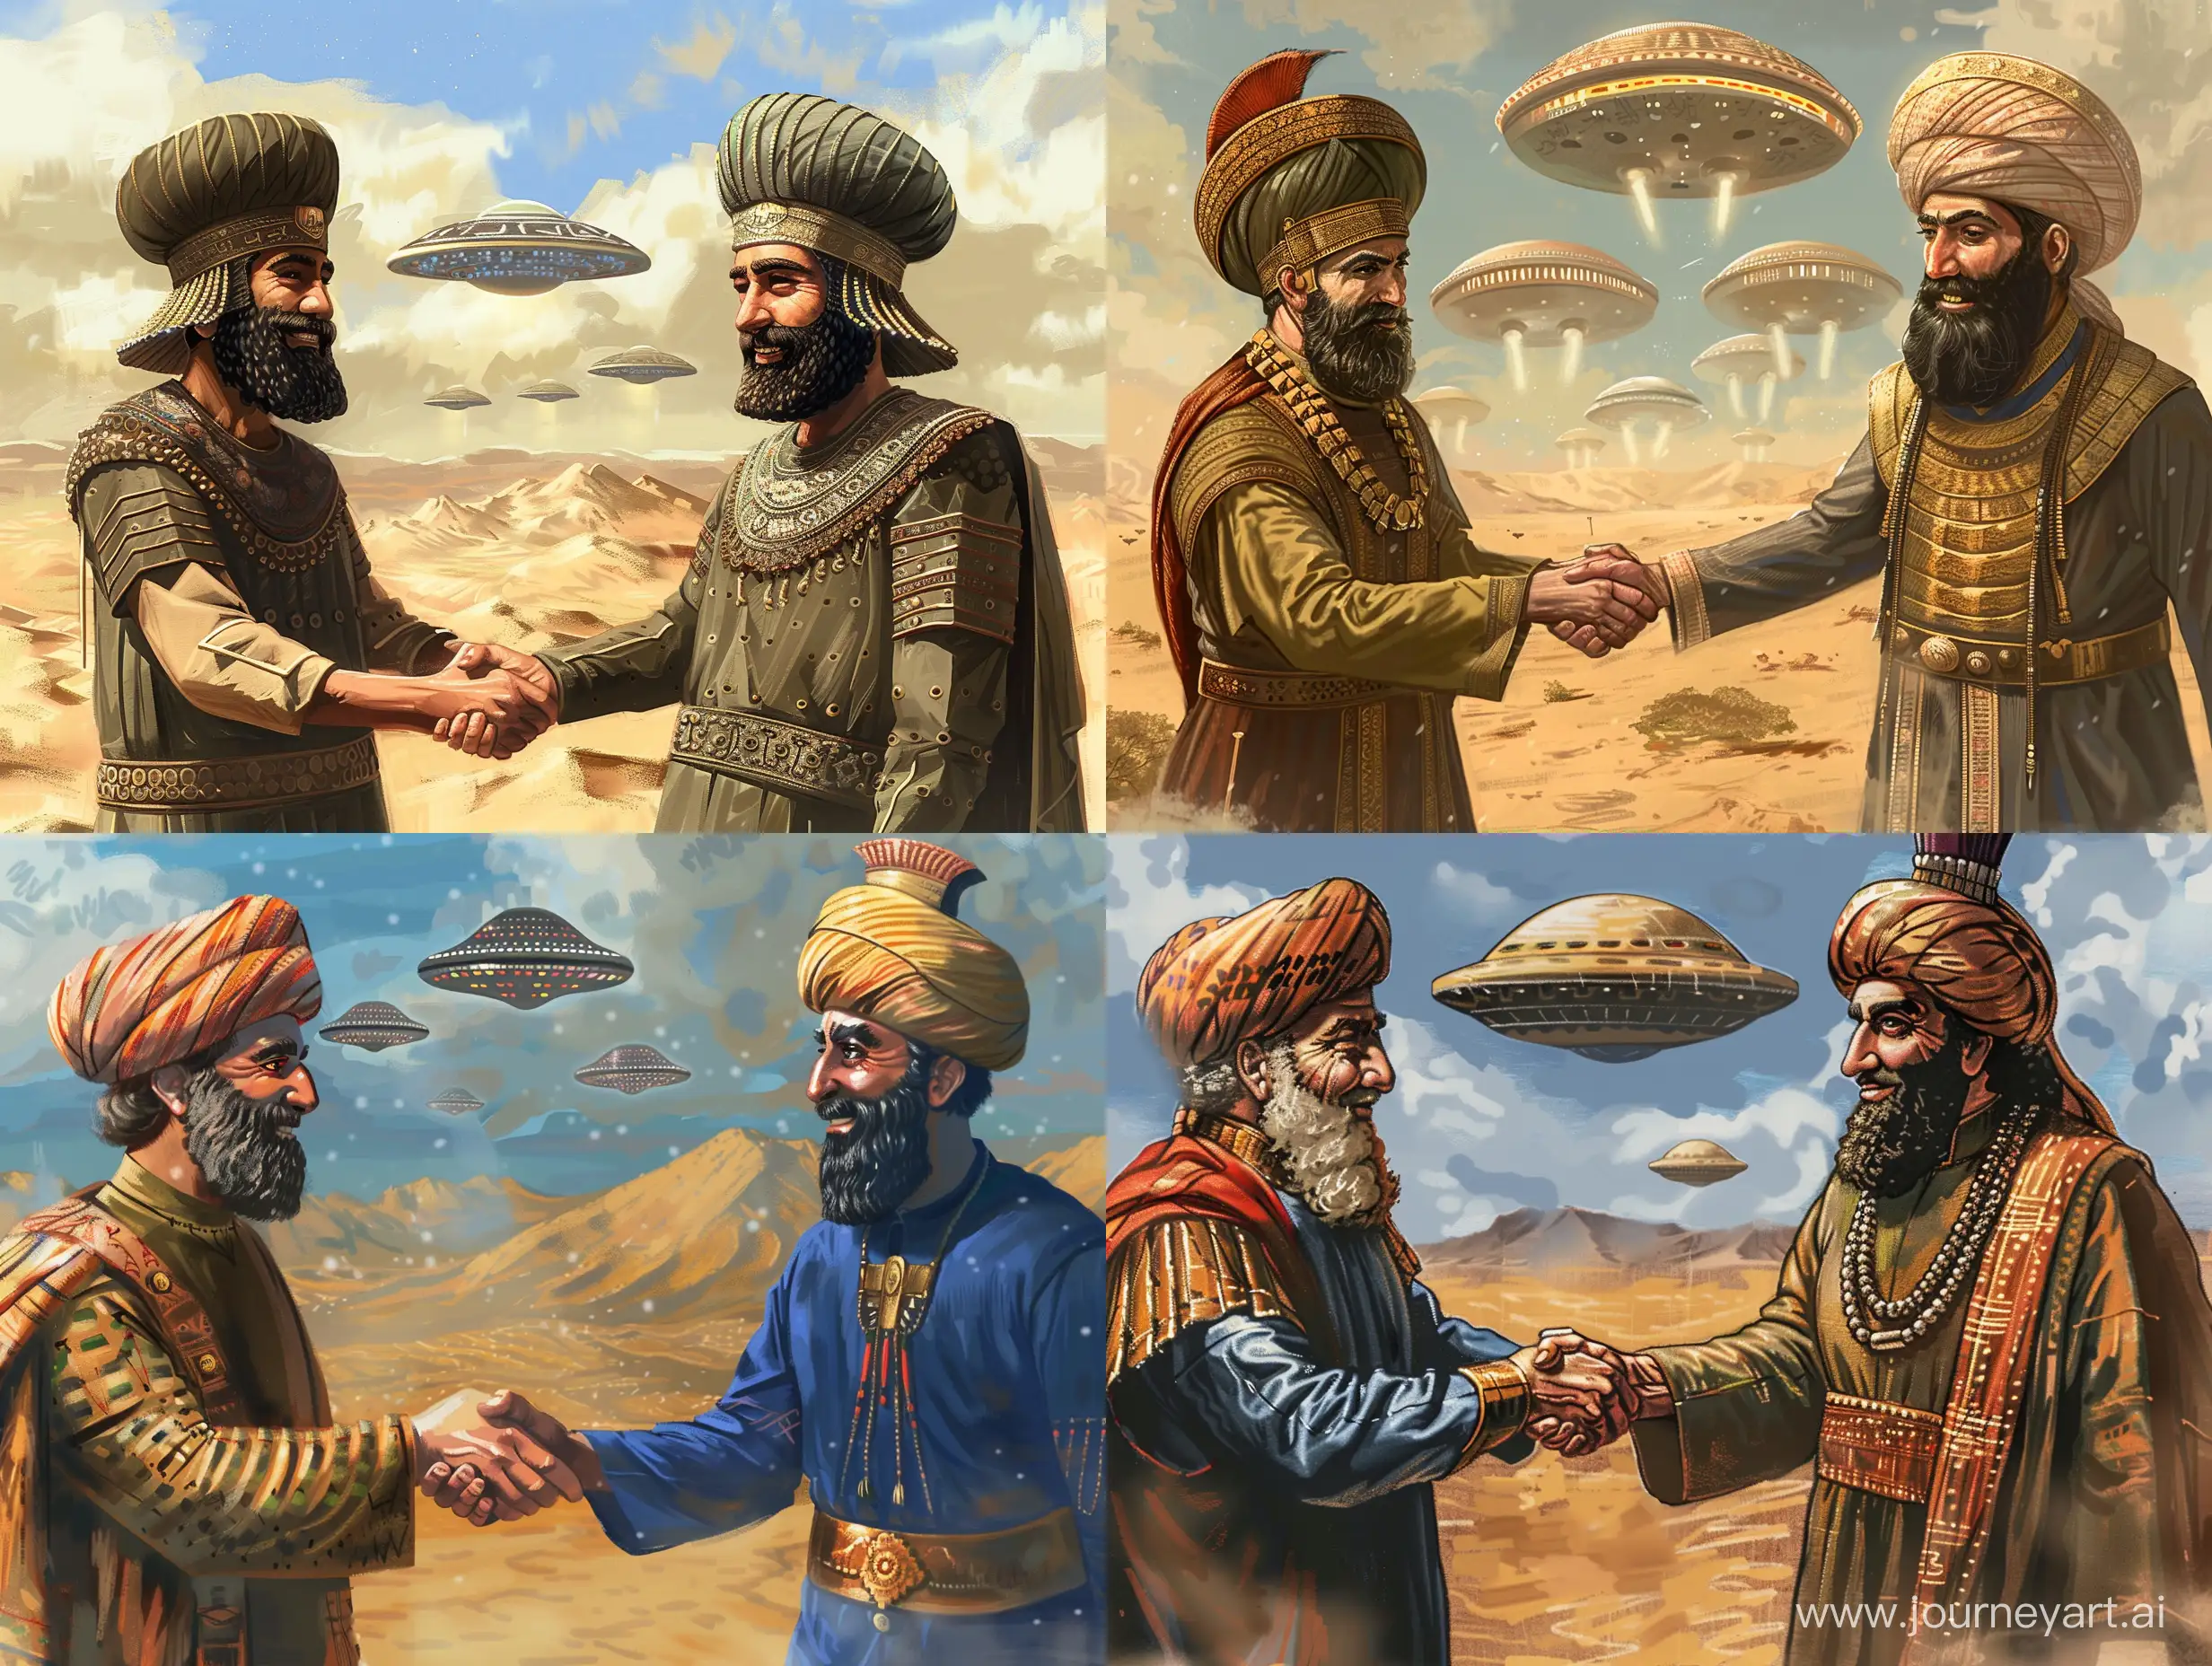 Cyrus-the-Great-and-Nader-Shah-Smiling-in-the-Desert-with-UFOs-in-Lofi-Background